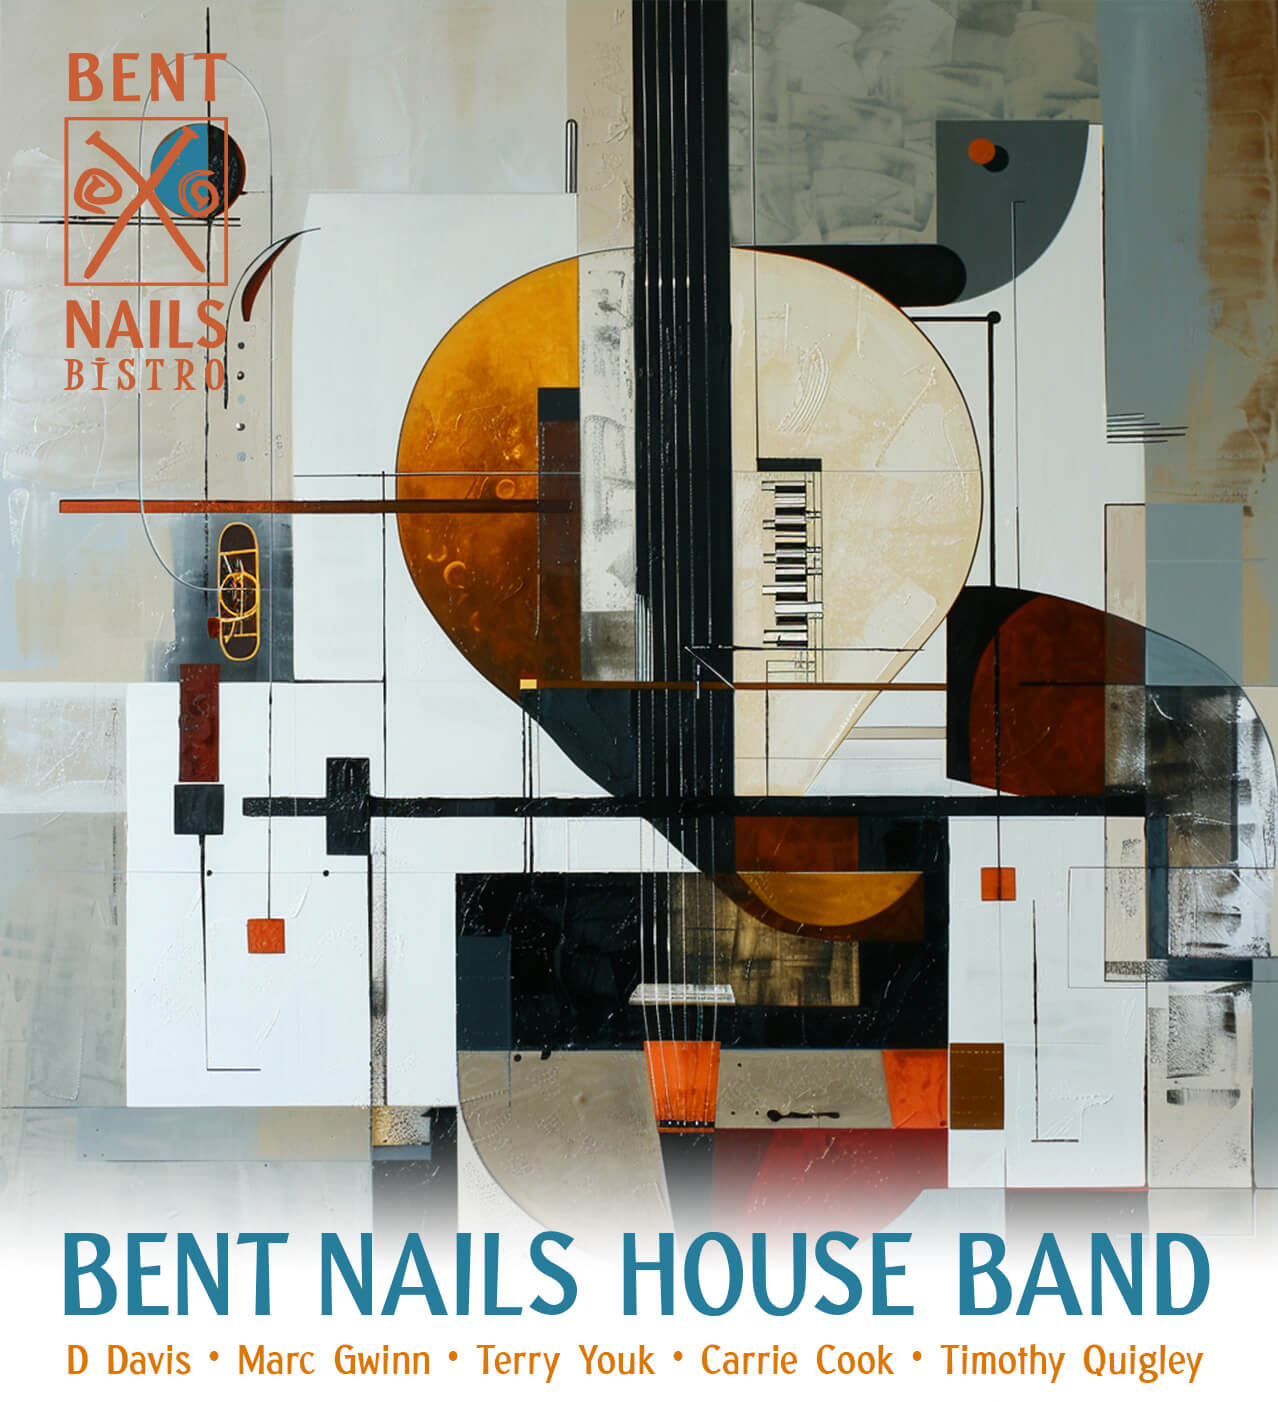 The Bent Nails House Band July poster